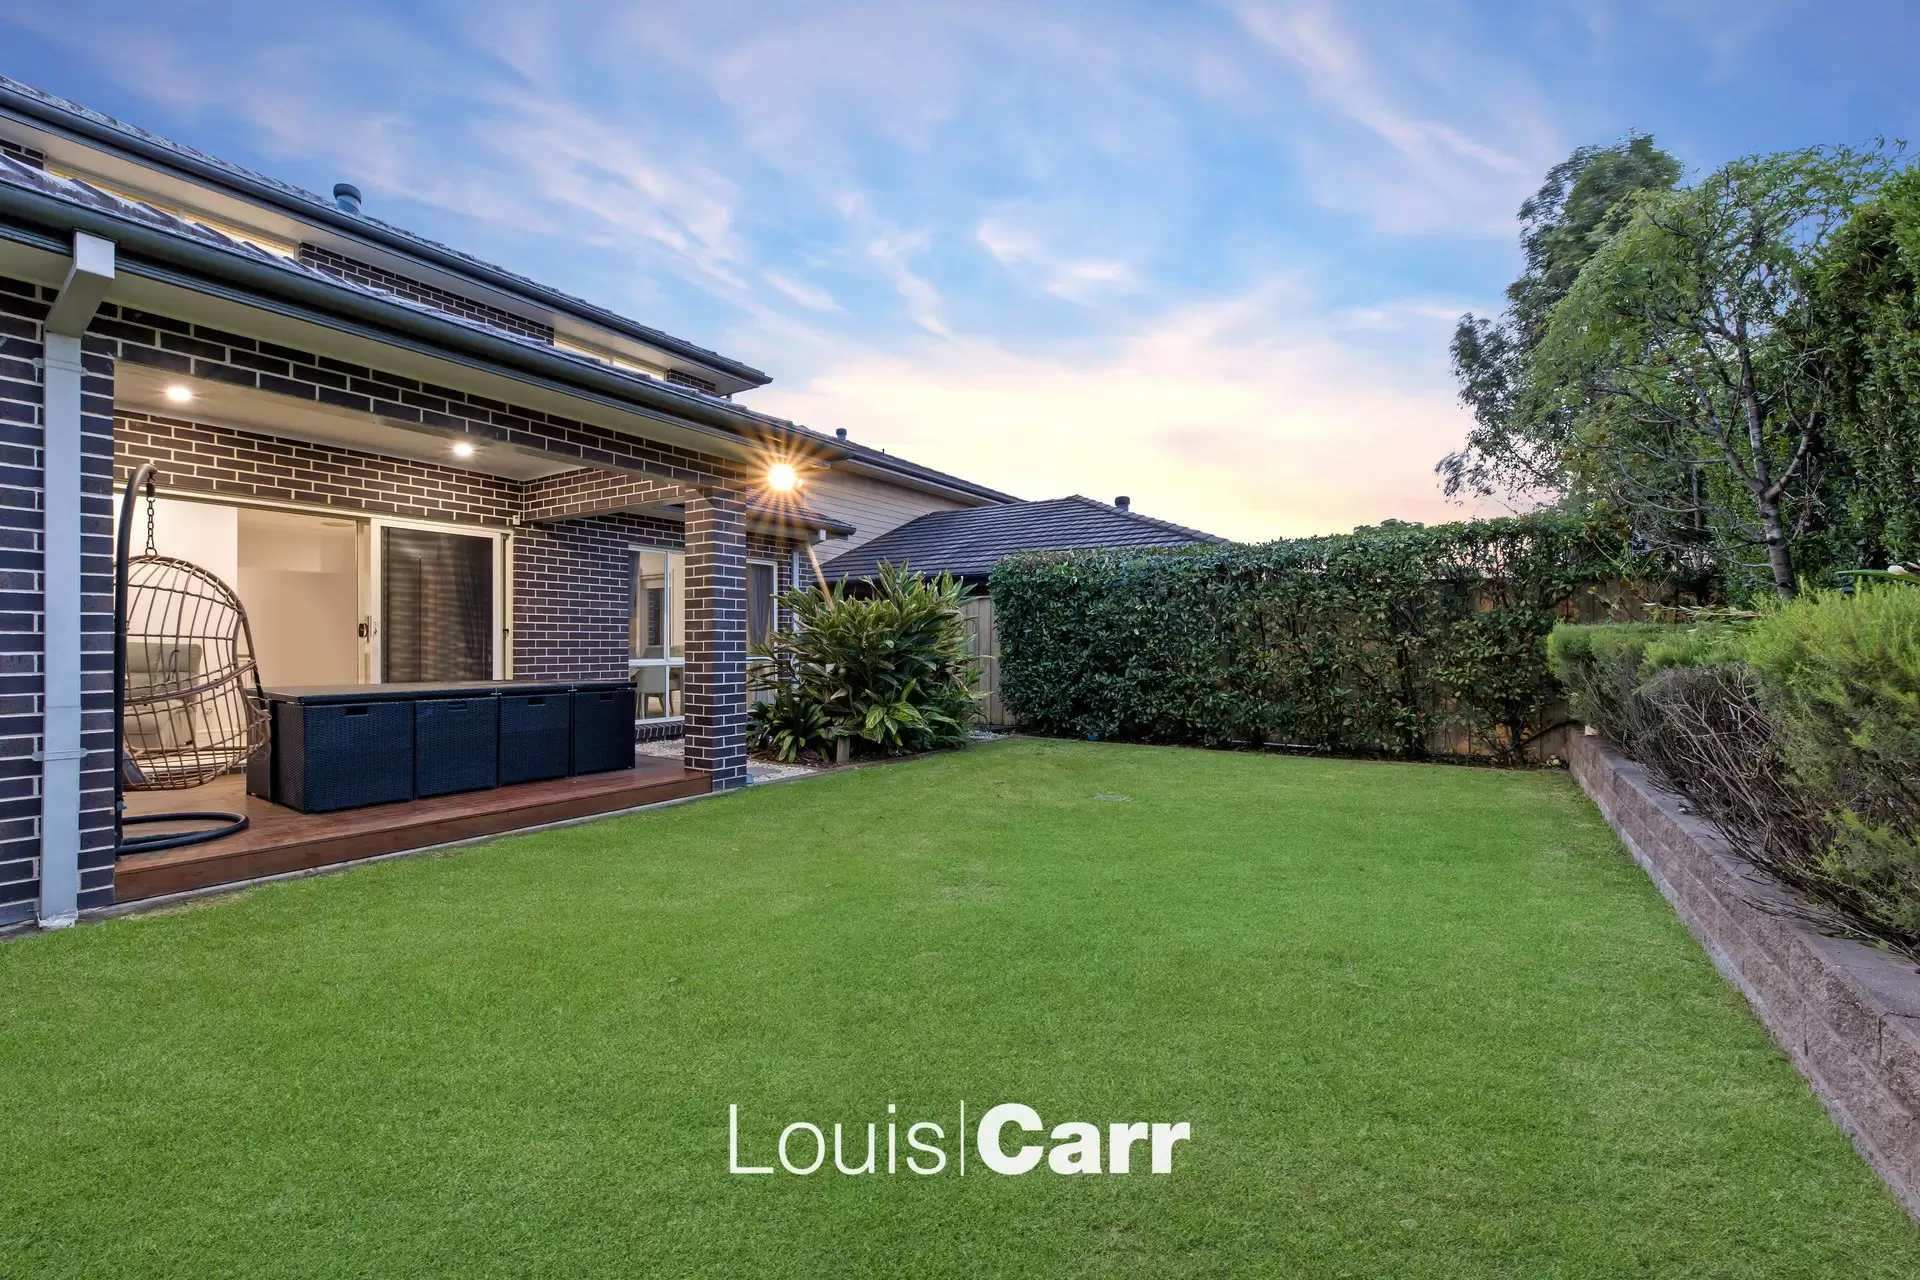 Photo #2: 9 Freshwater Road, Rouse Hill - For Sale by Louis Carr Real Estate